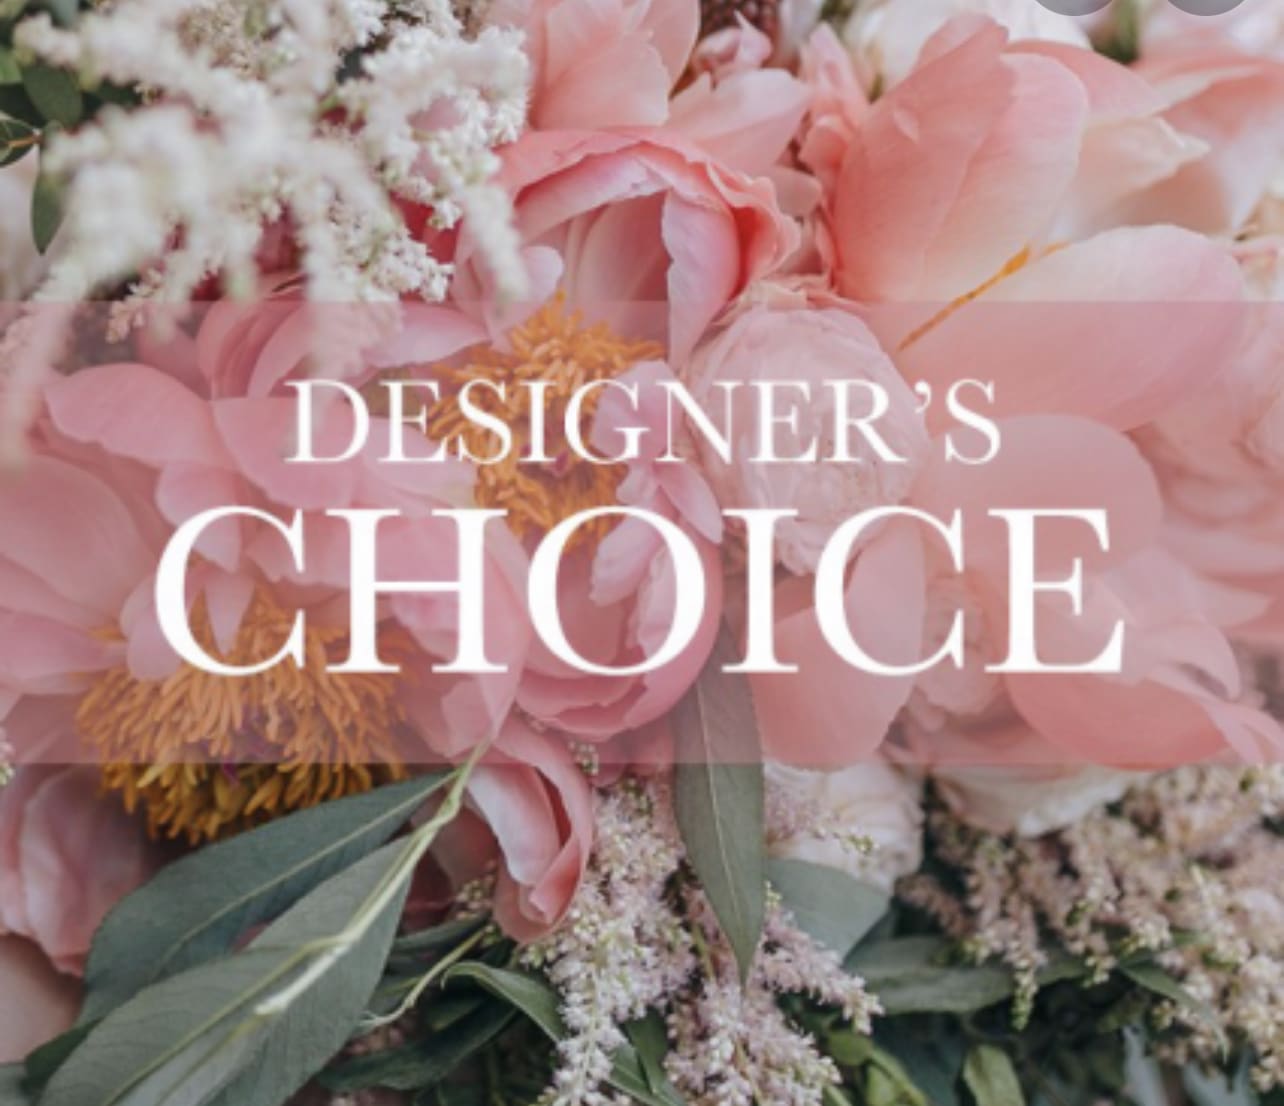 Designers choice  - Freshest overall mix of the day. Designers choose the freshest blooms for the perfect arrangement every time arranged in a clear glass vase in price you prefer. Leave it to the experts to pick for you!